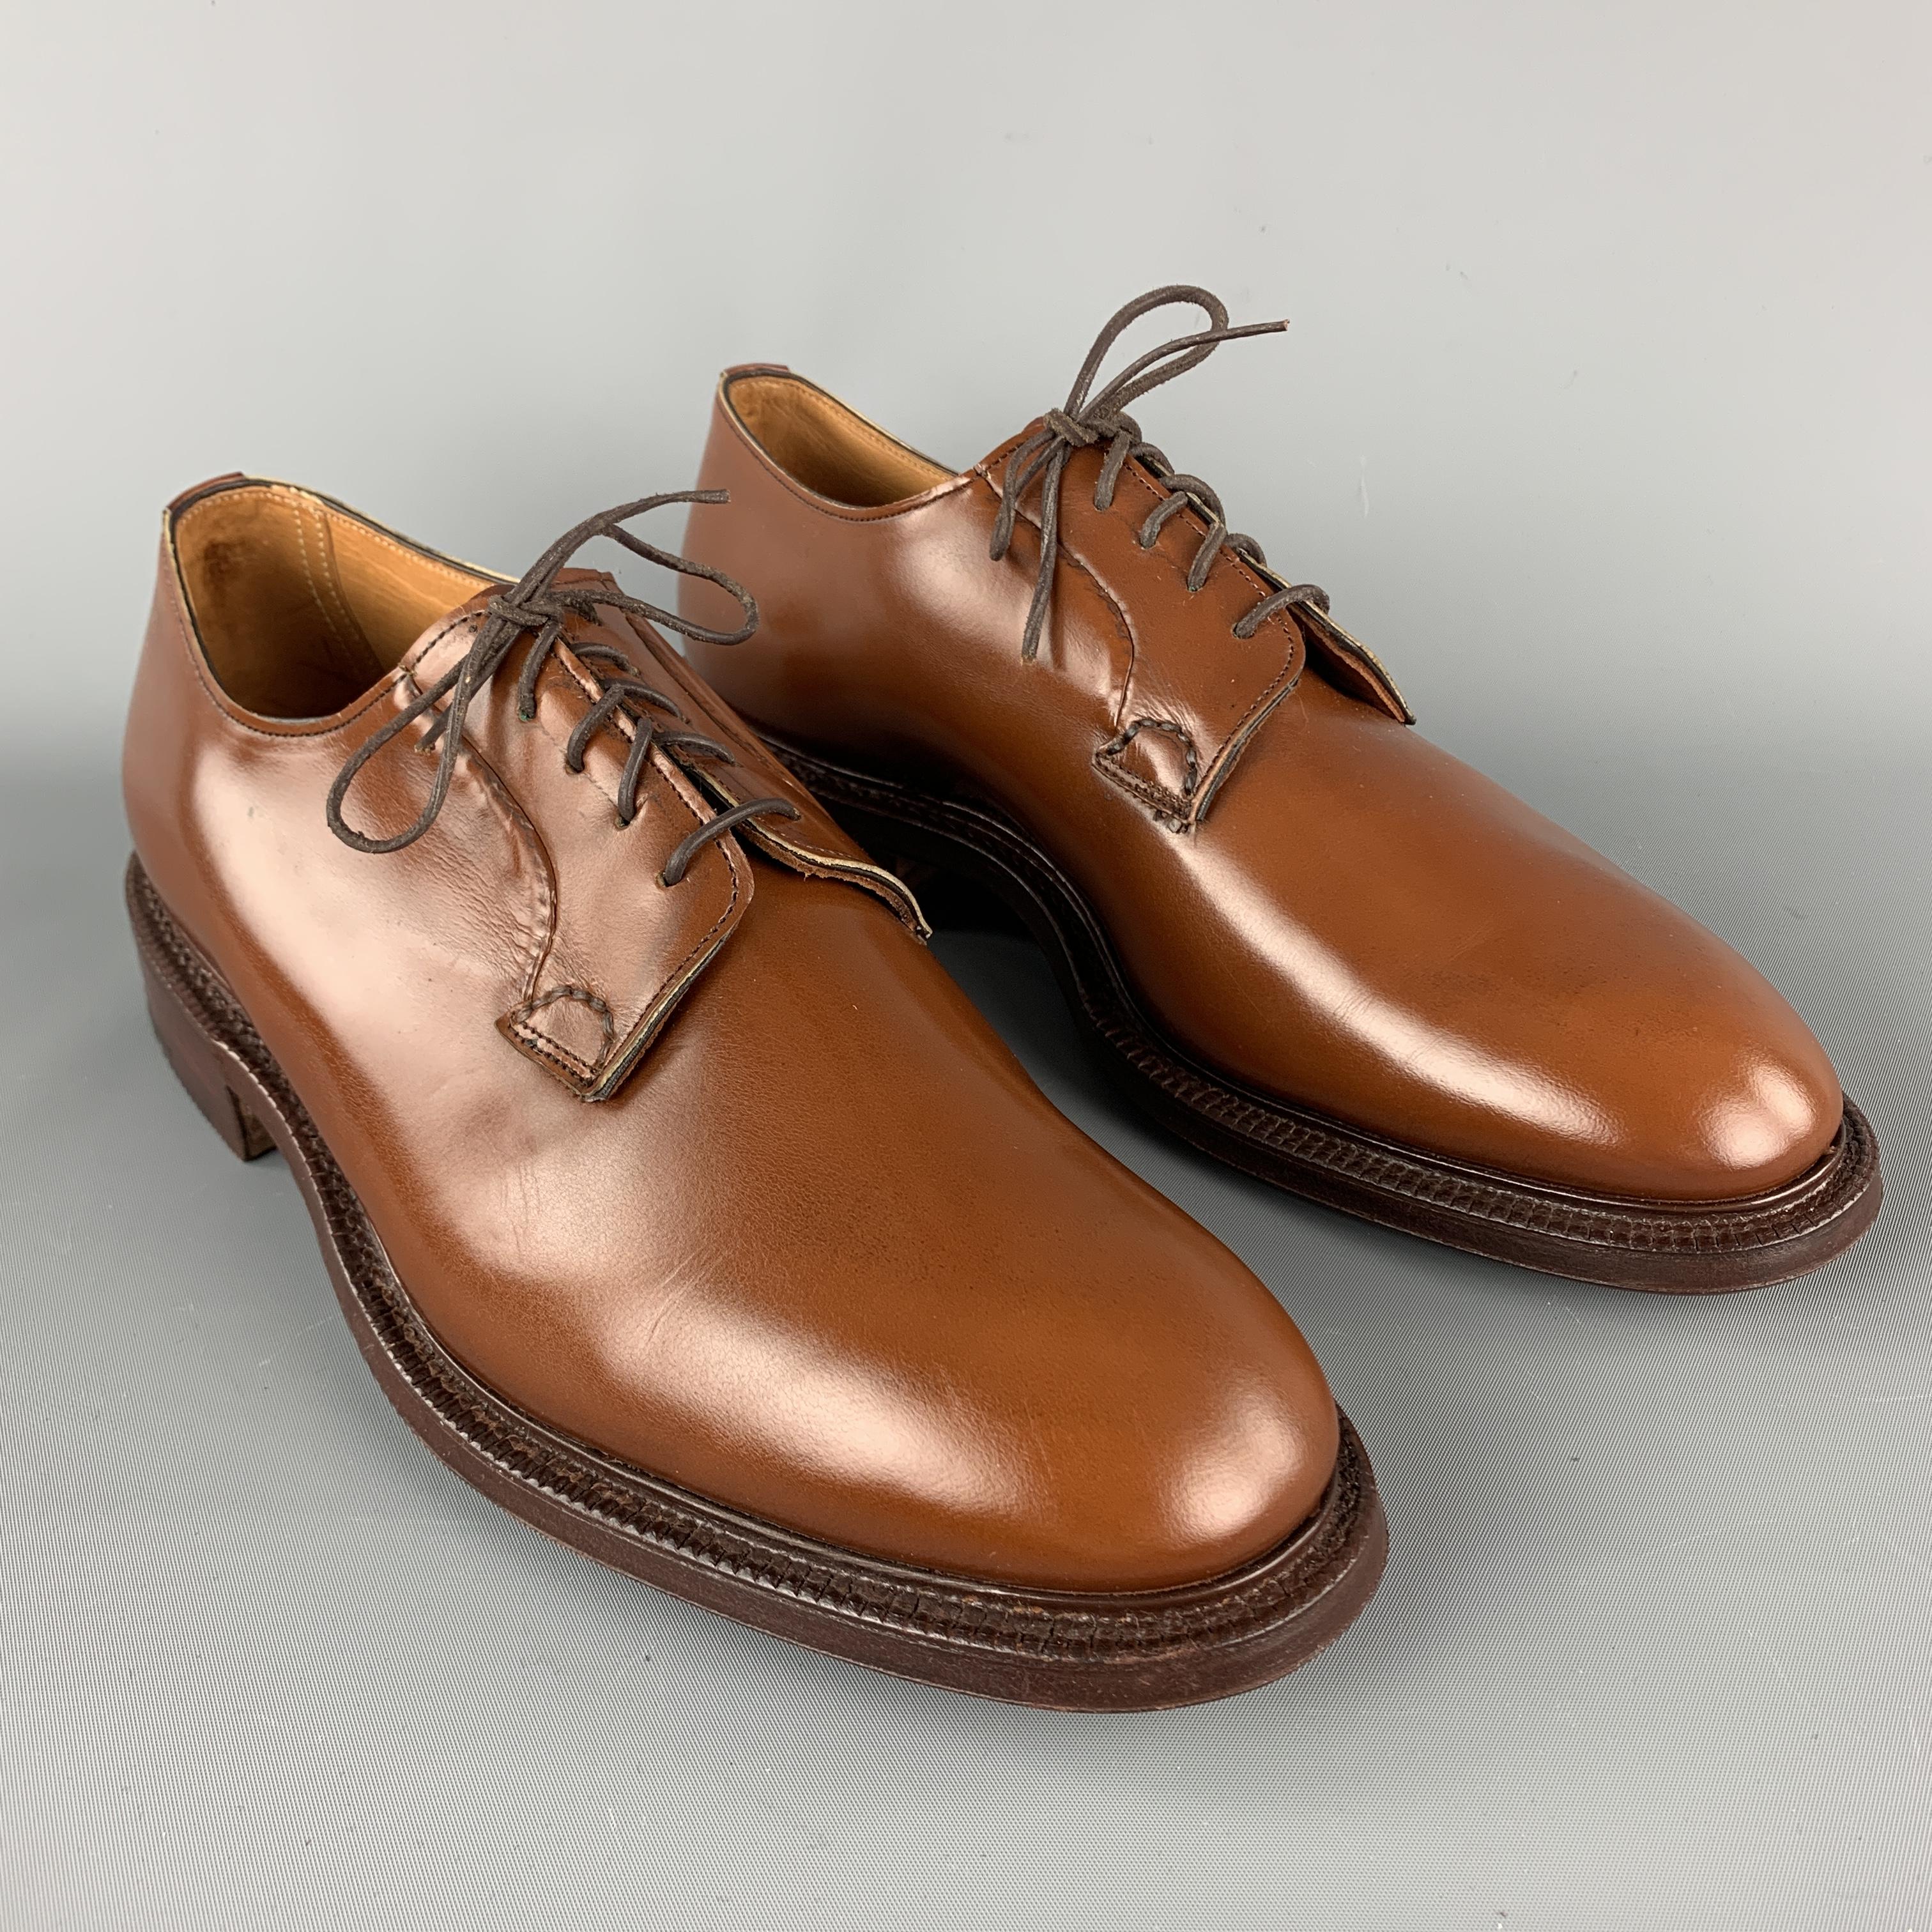 CHURCH'S Lace Up Shoes comes in a solid tan leather material, featuring a contrast stitch and a leather sole. Made in England.

New with Box.
Marked: UK 9D

Outsole: 11 3/4 x 4 1/4 in. 